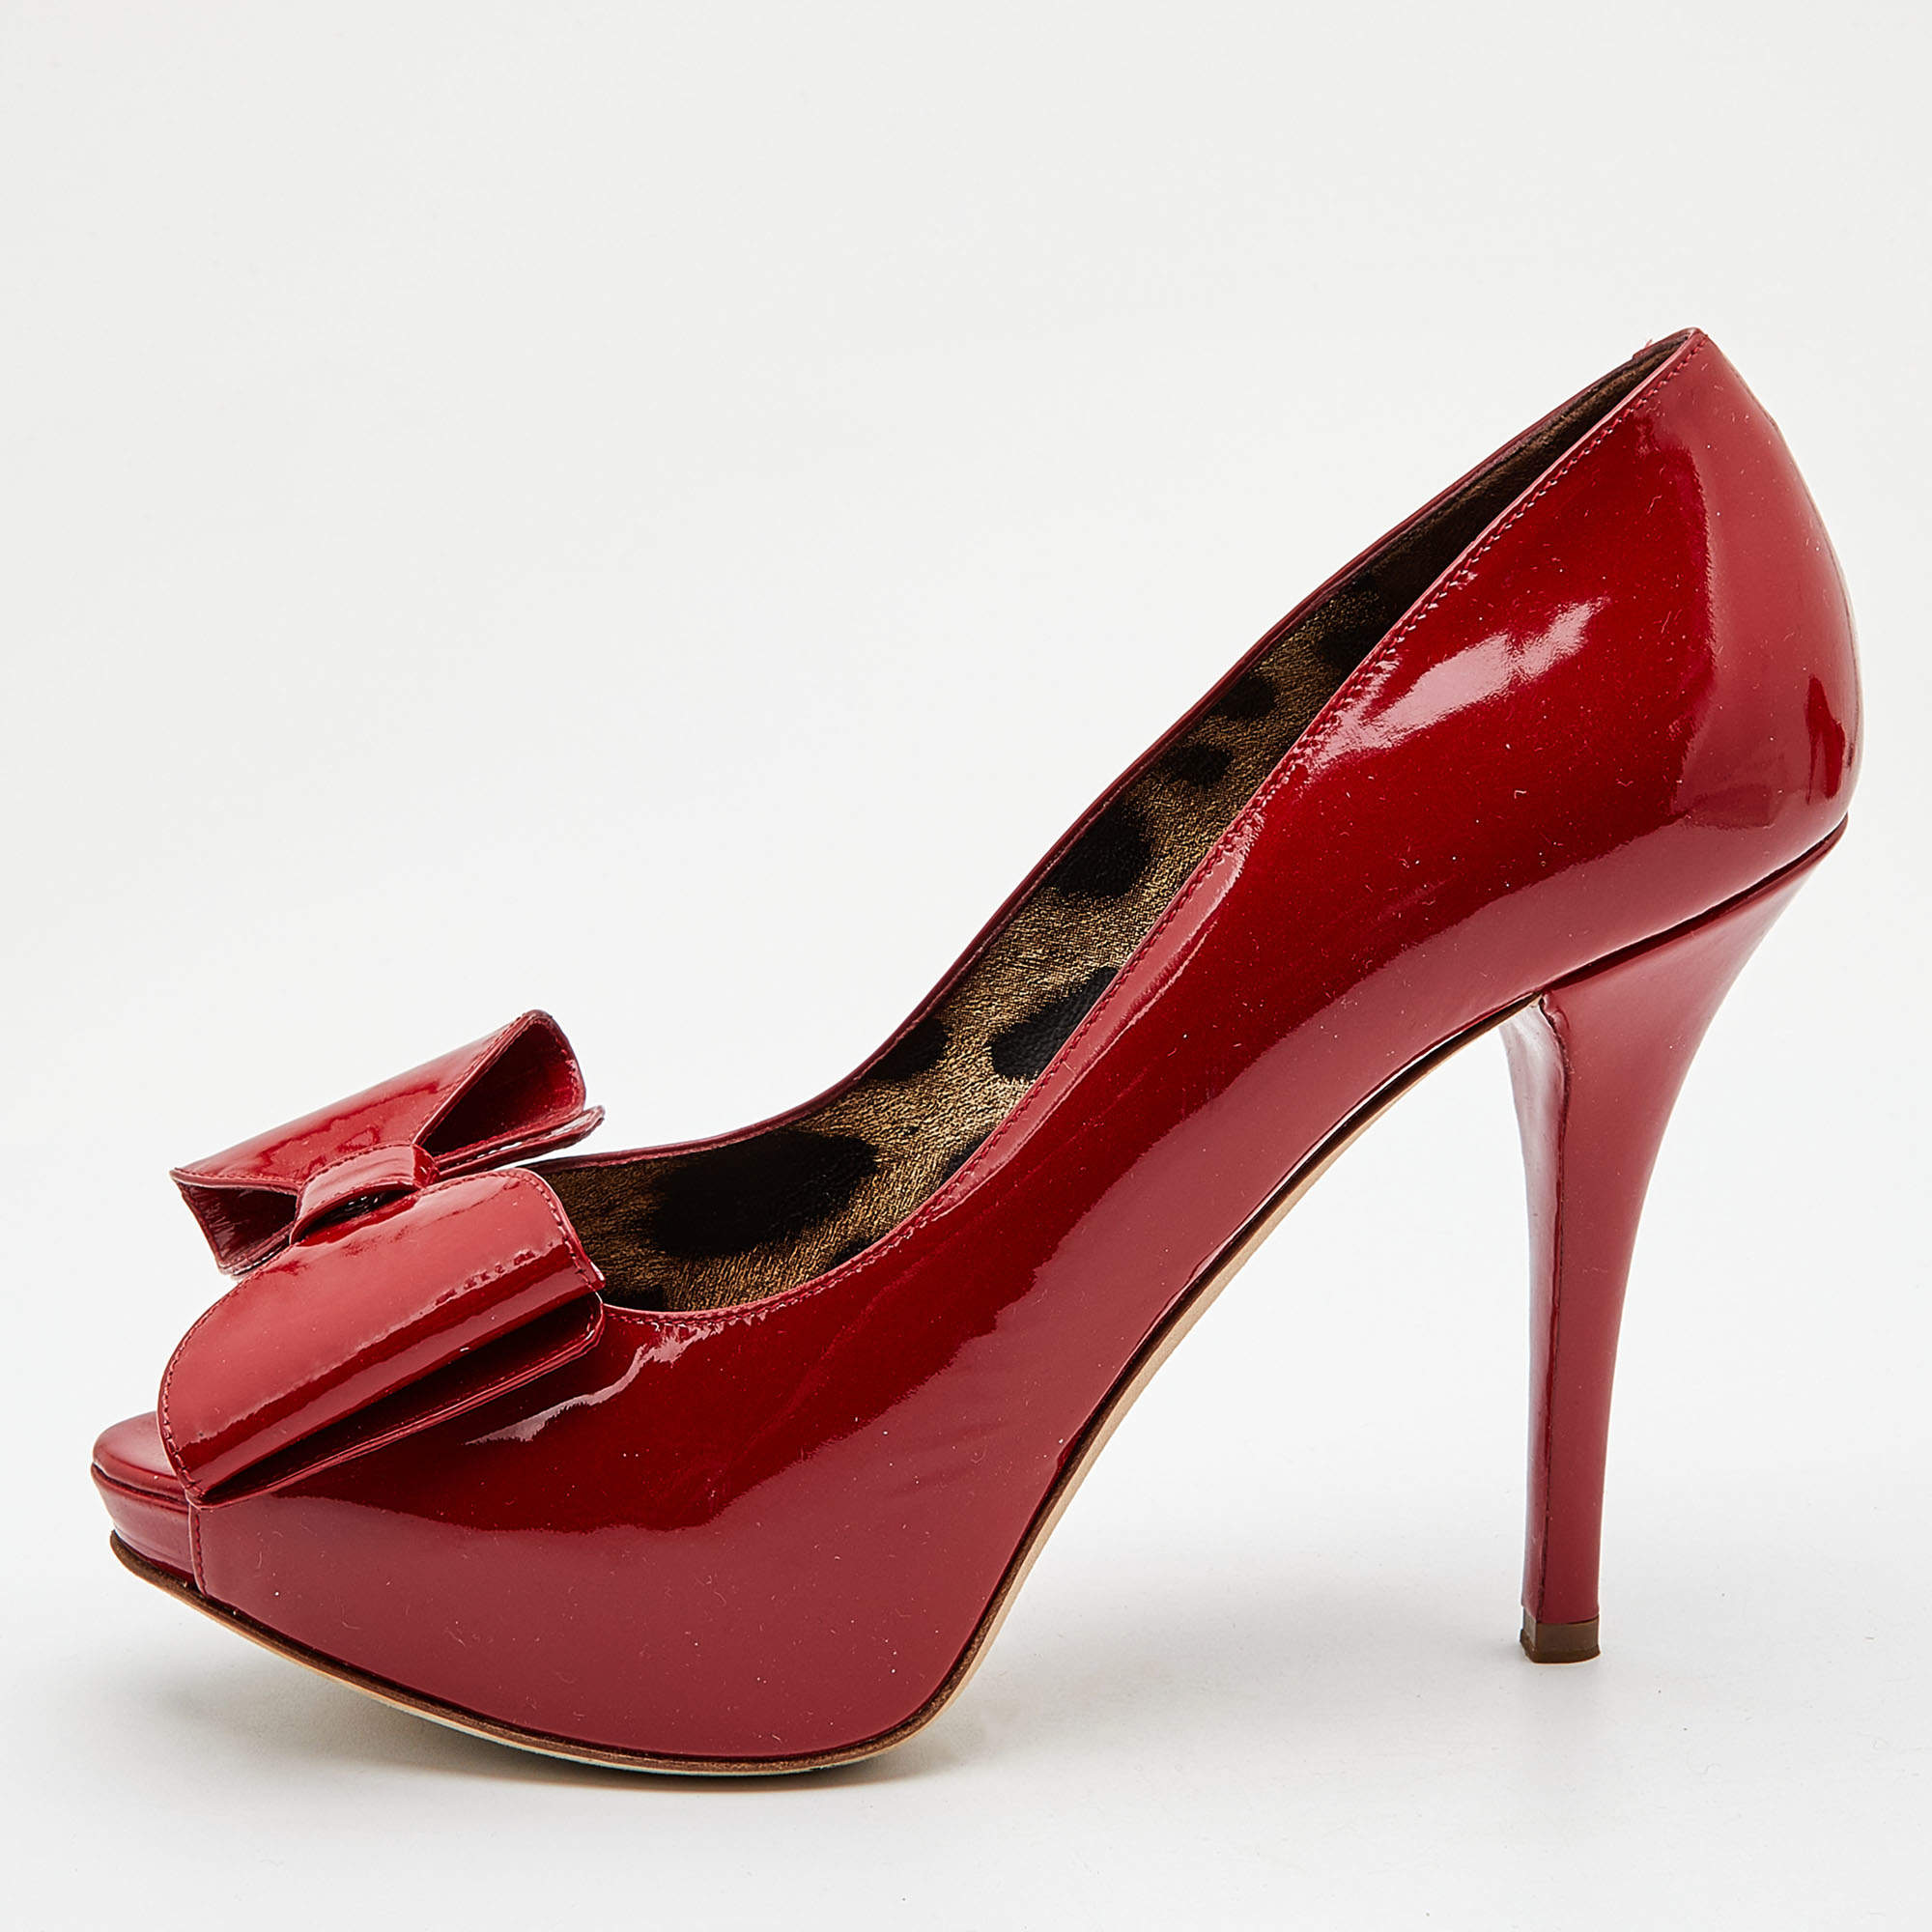 Christian Louboutin Red Leather Strass Degrade So Kate Pumps Size